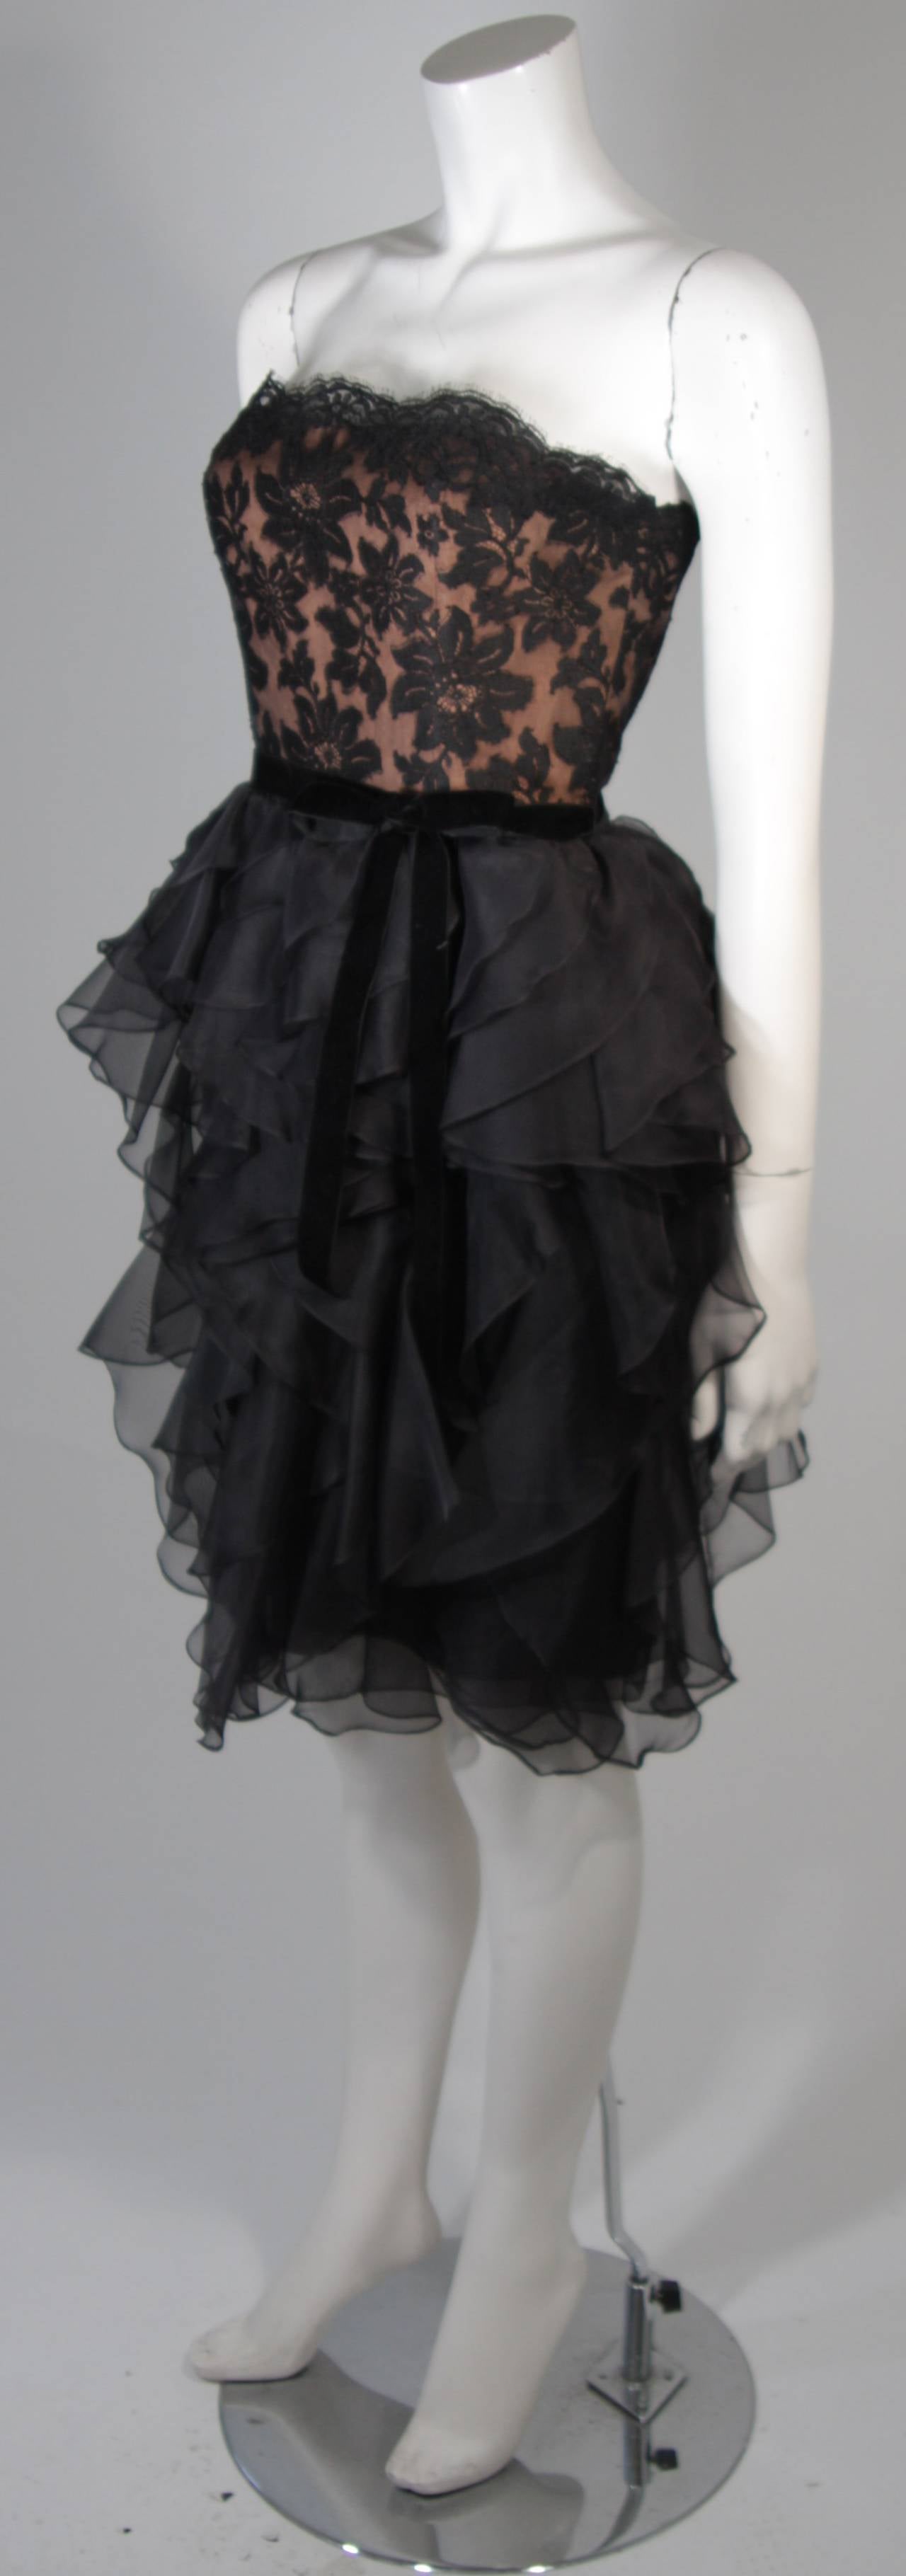 Jill Richards Black Lace Cocktail Dress with Layered Silk Skirt Size 6 In Excellent Condition For Sale In Los Angeles, CA